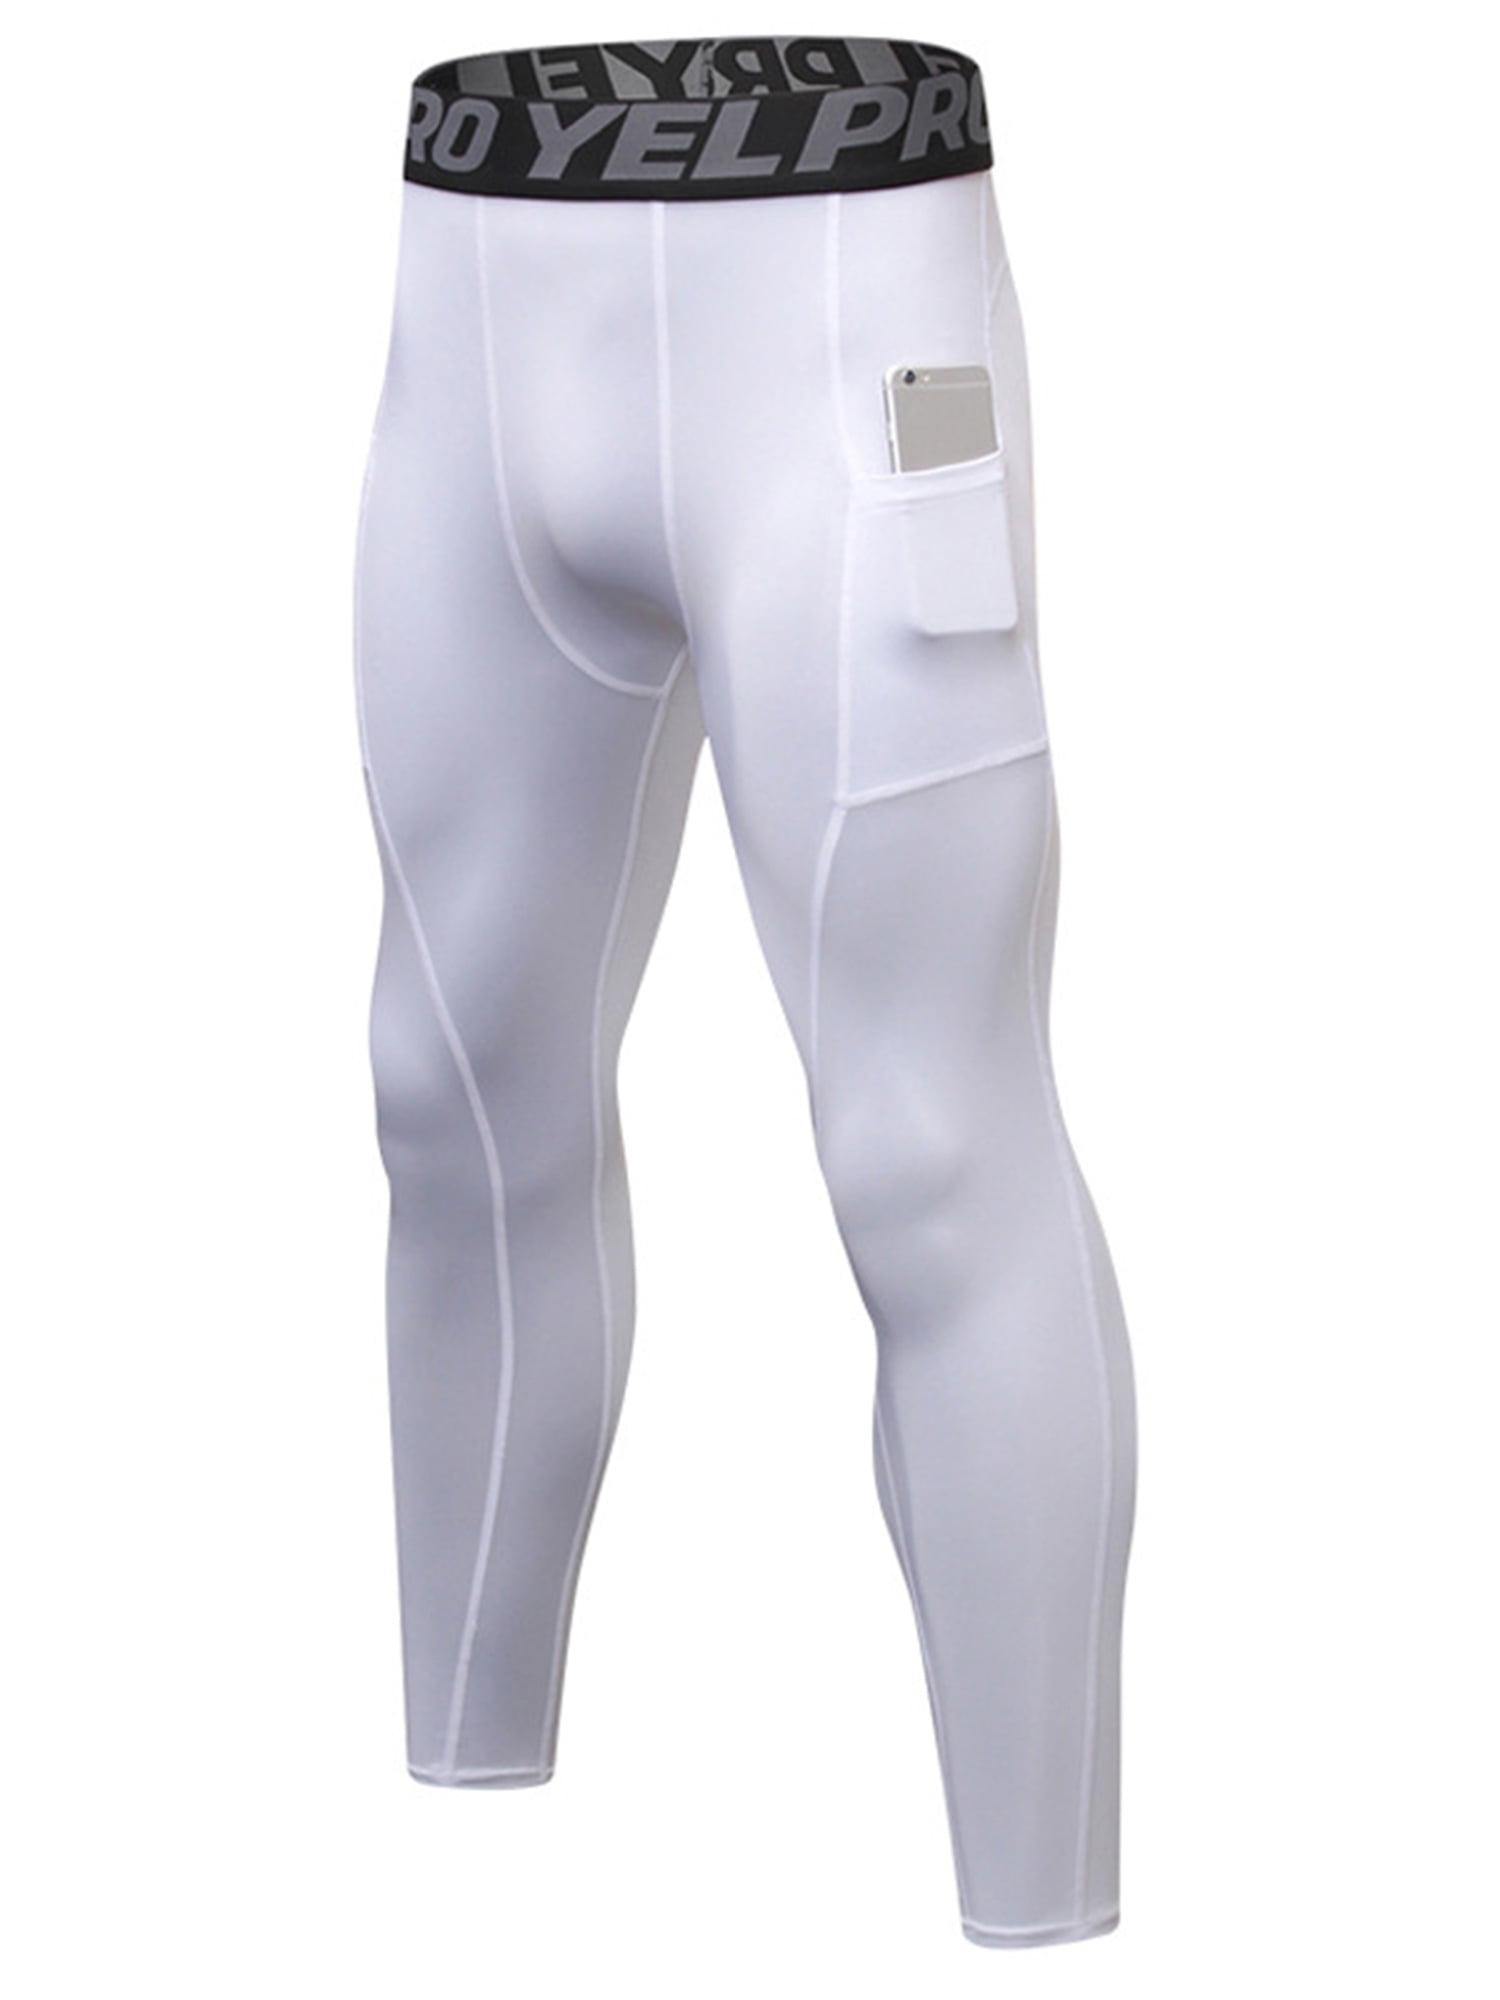 Men's Cycling Running Compression Gym Tights Sports Pants With Pocket